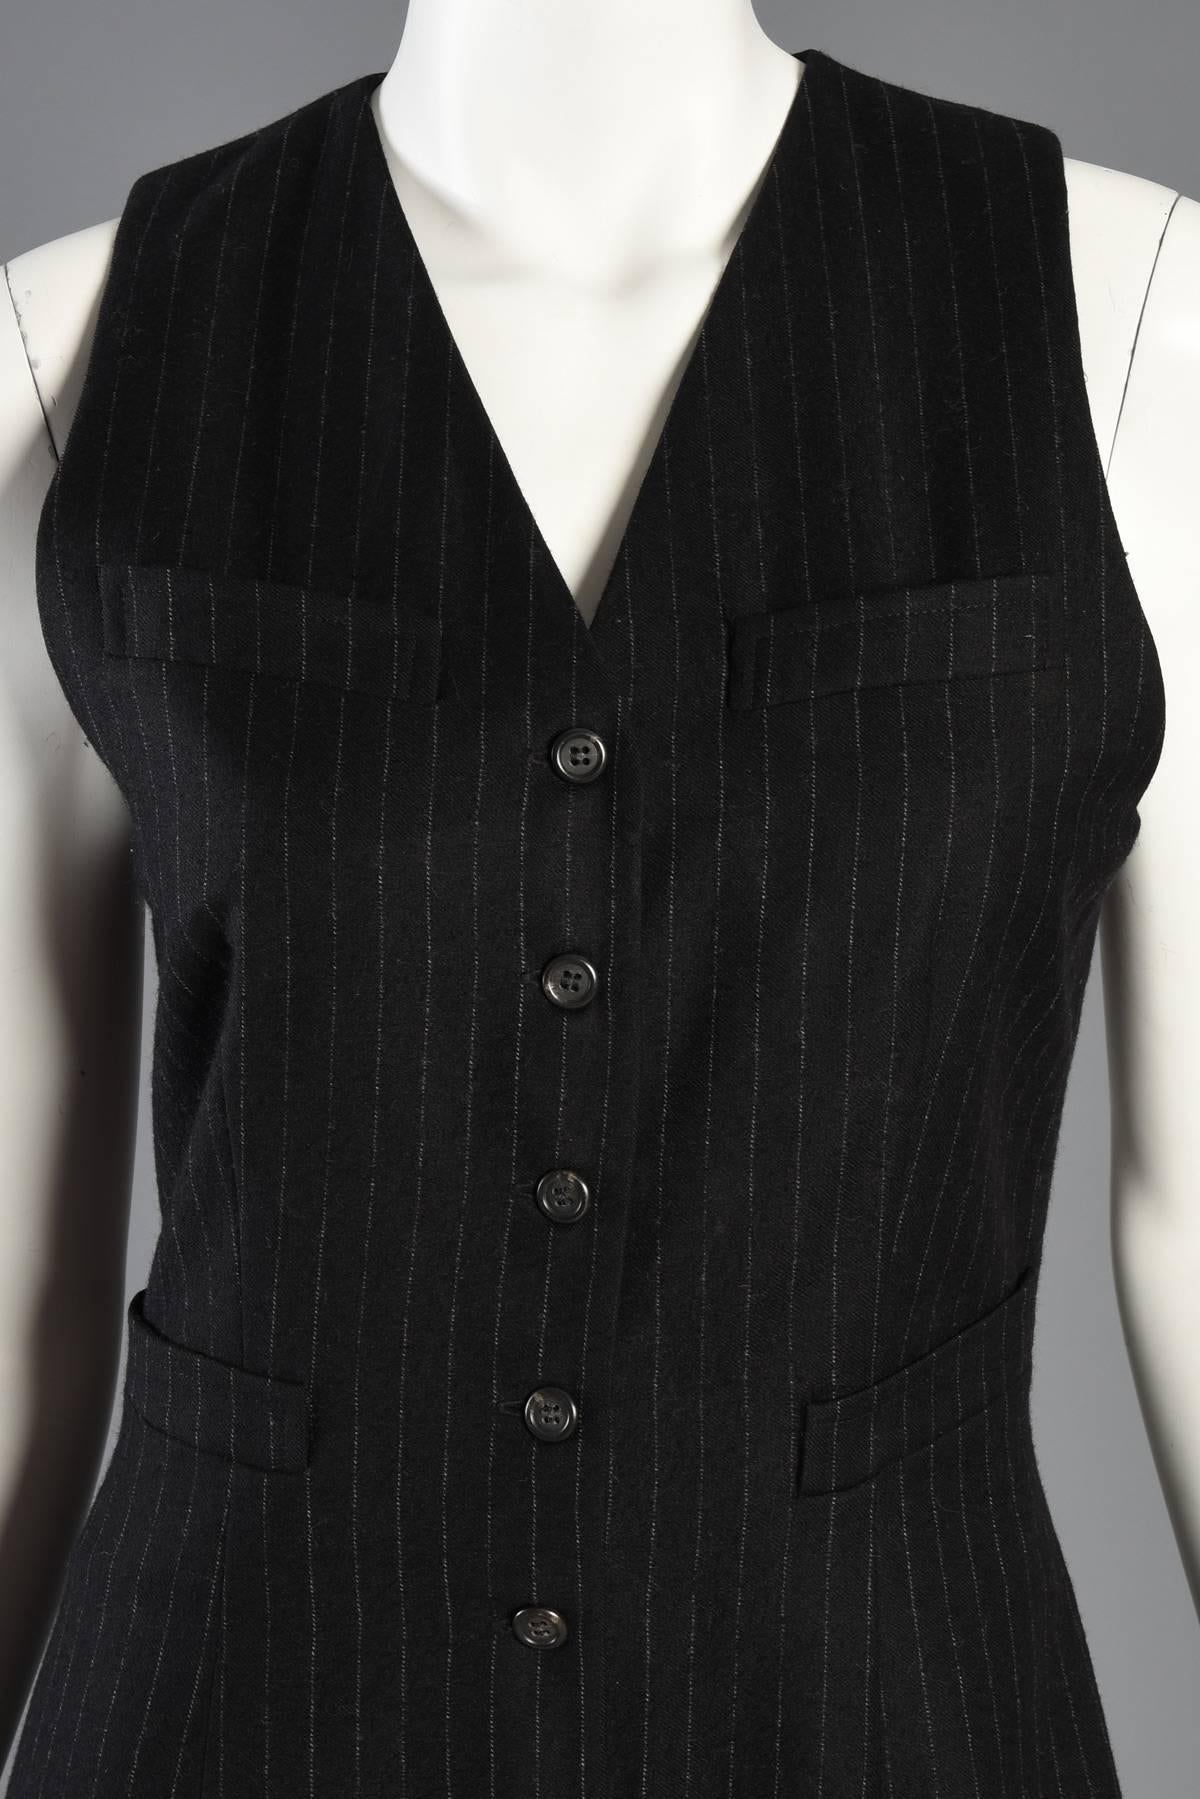 Ralph Lauren Pinstripe Wool Menswear Jumpsuit In Excellent Condition For Sale In Yucca Valley, CA